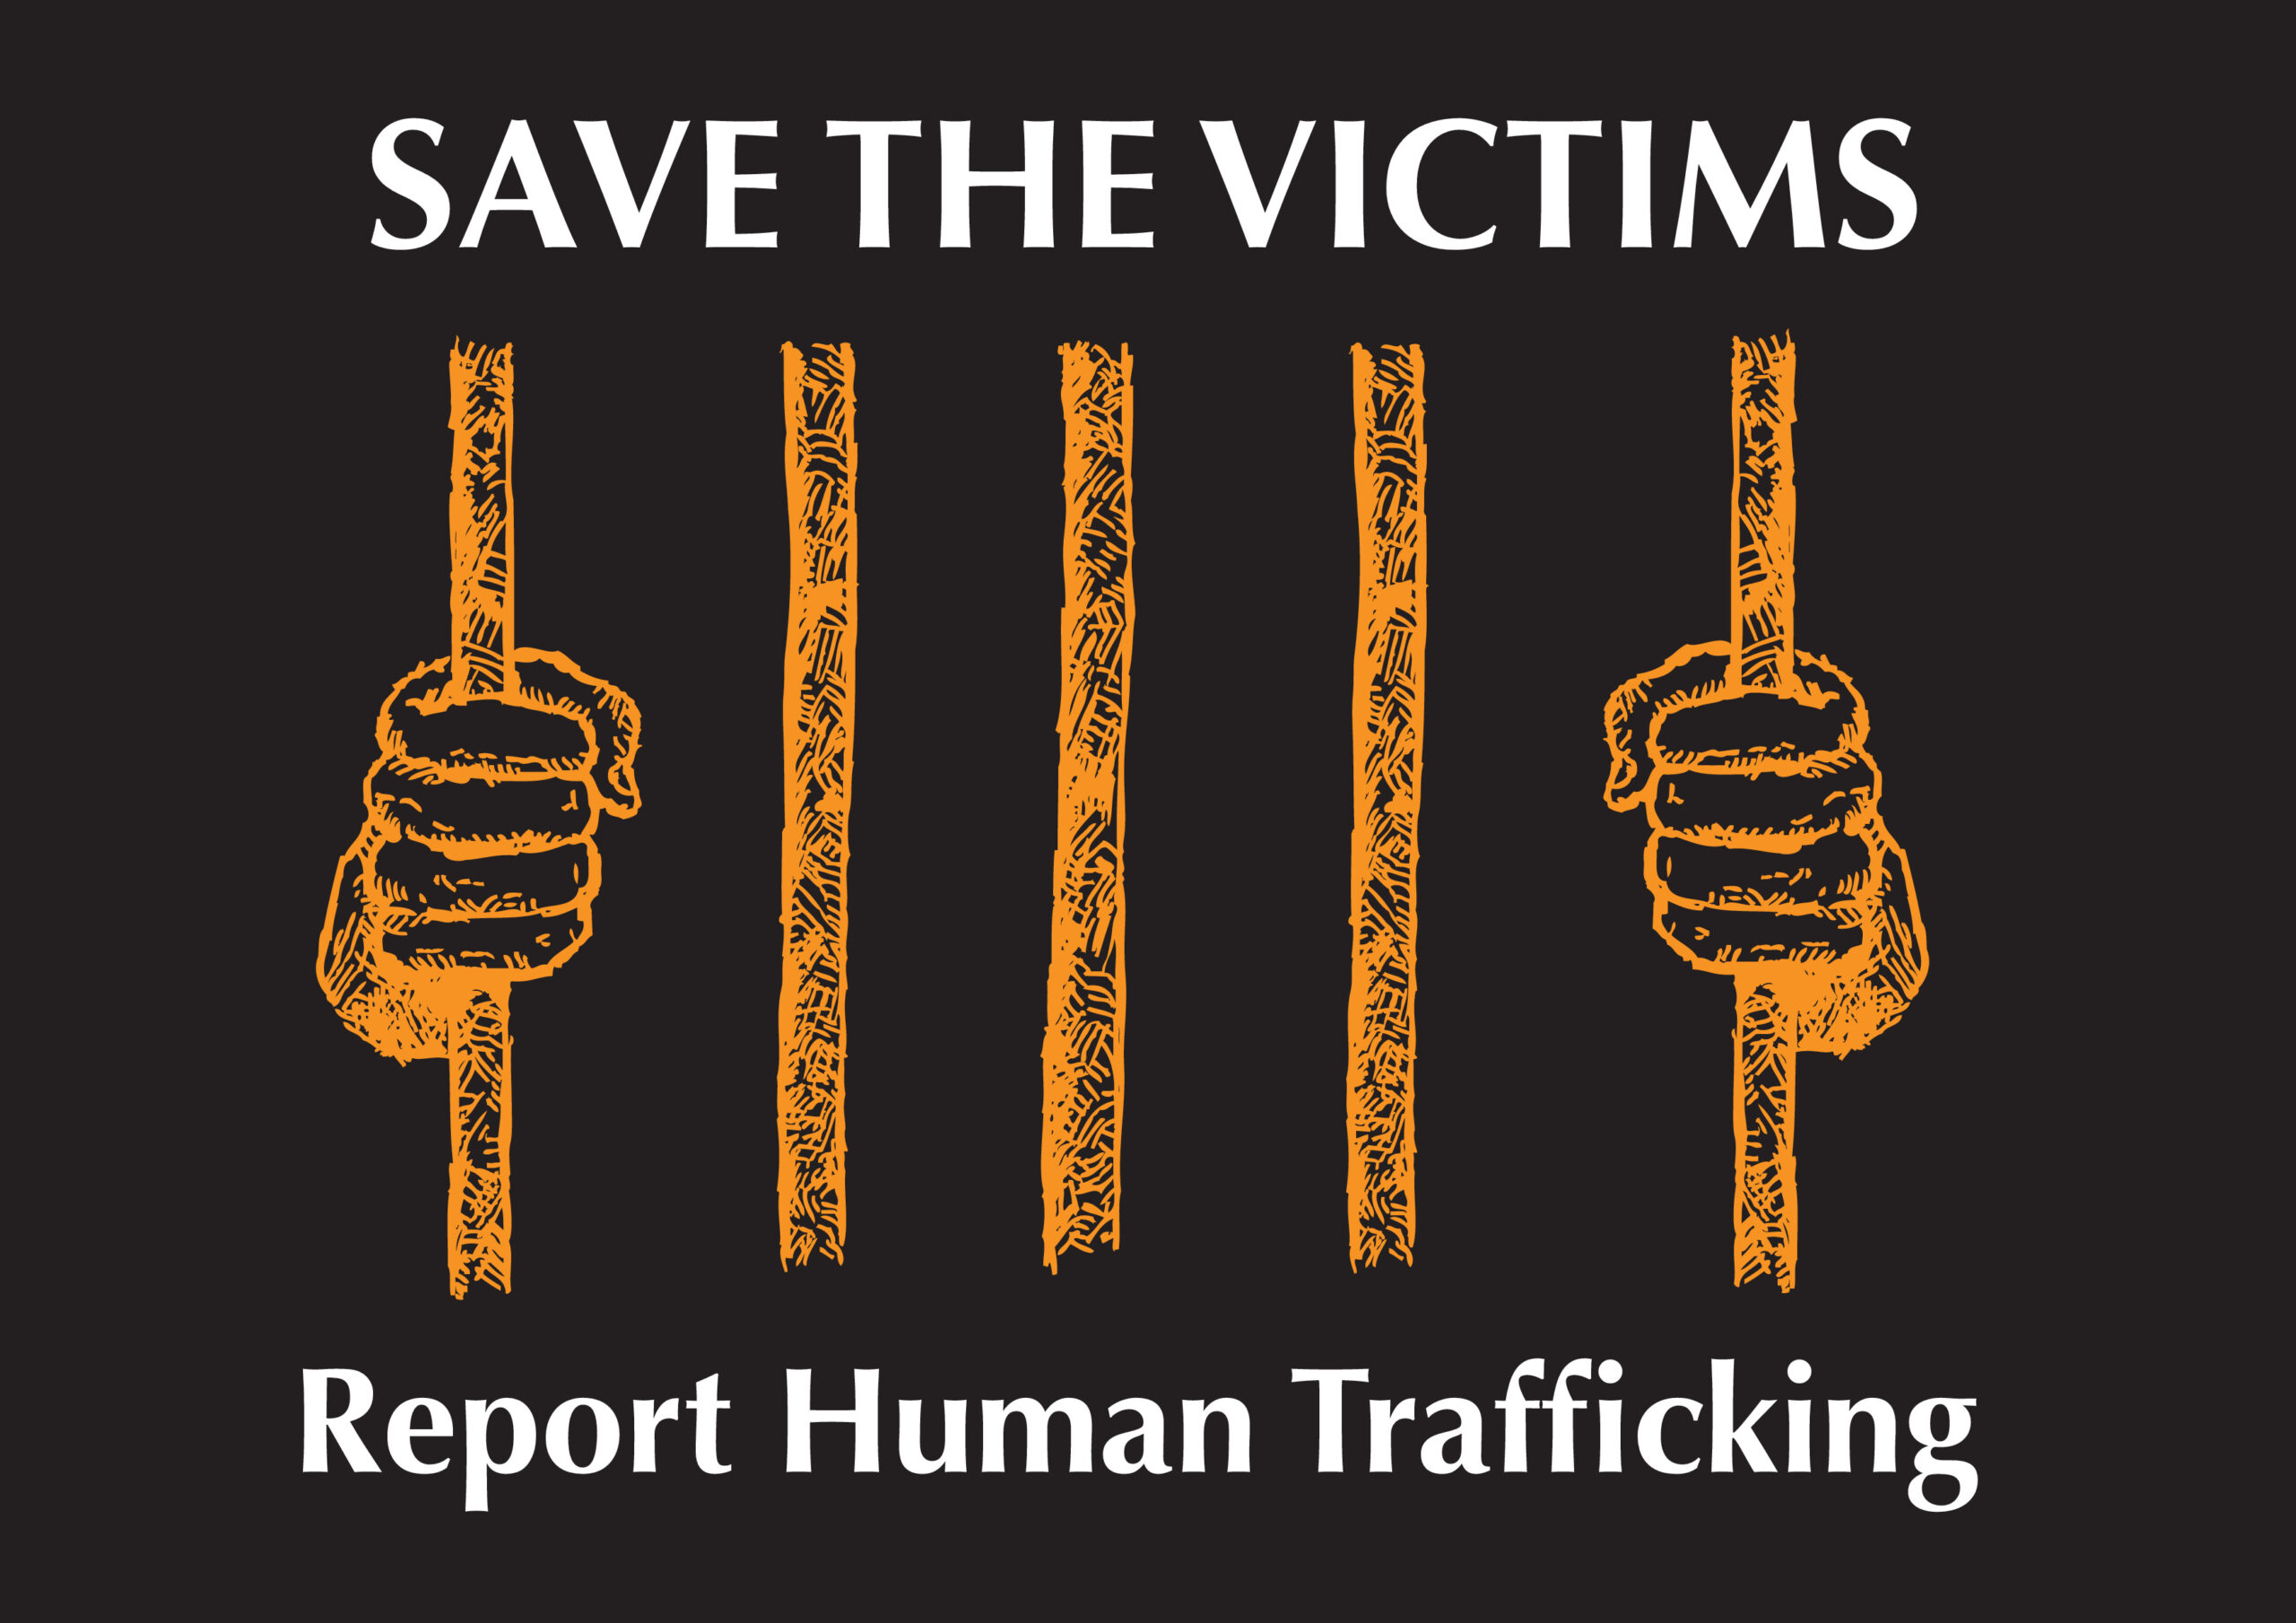 Why so few convictions for human trafficking?